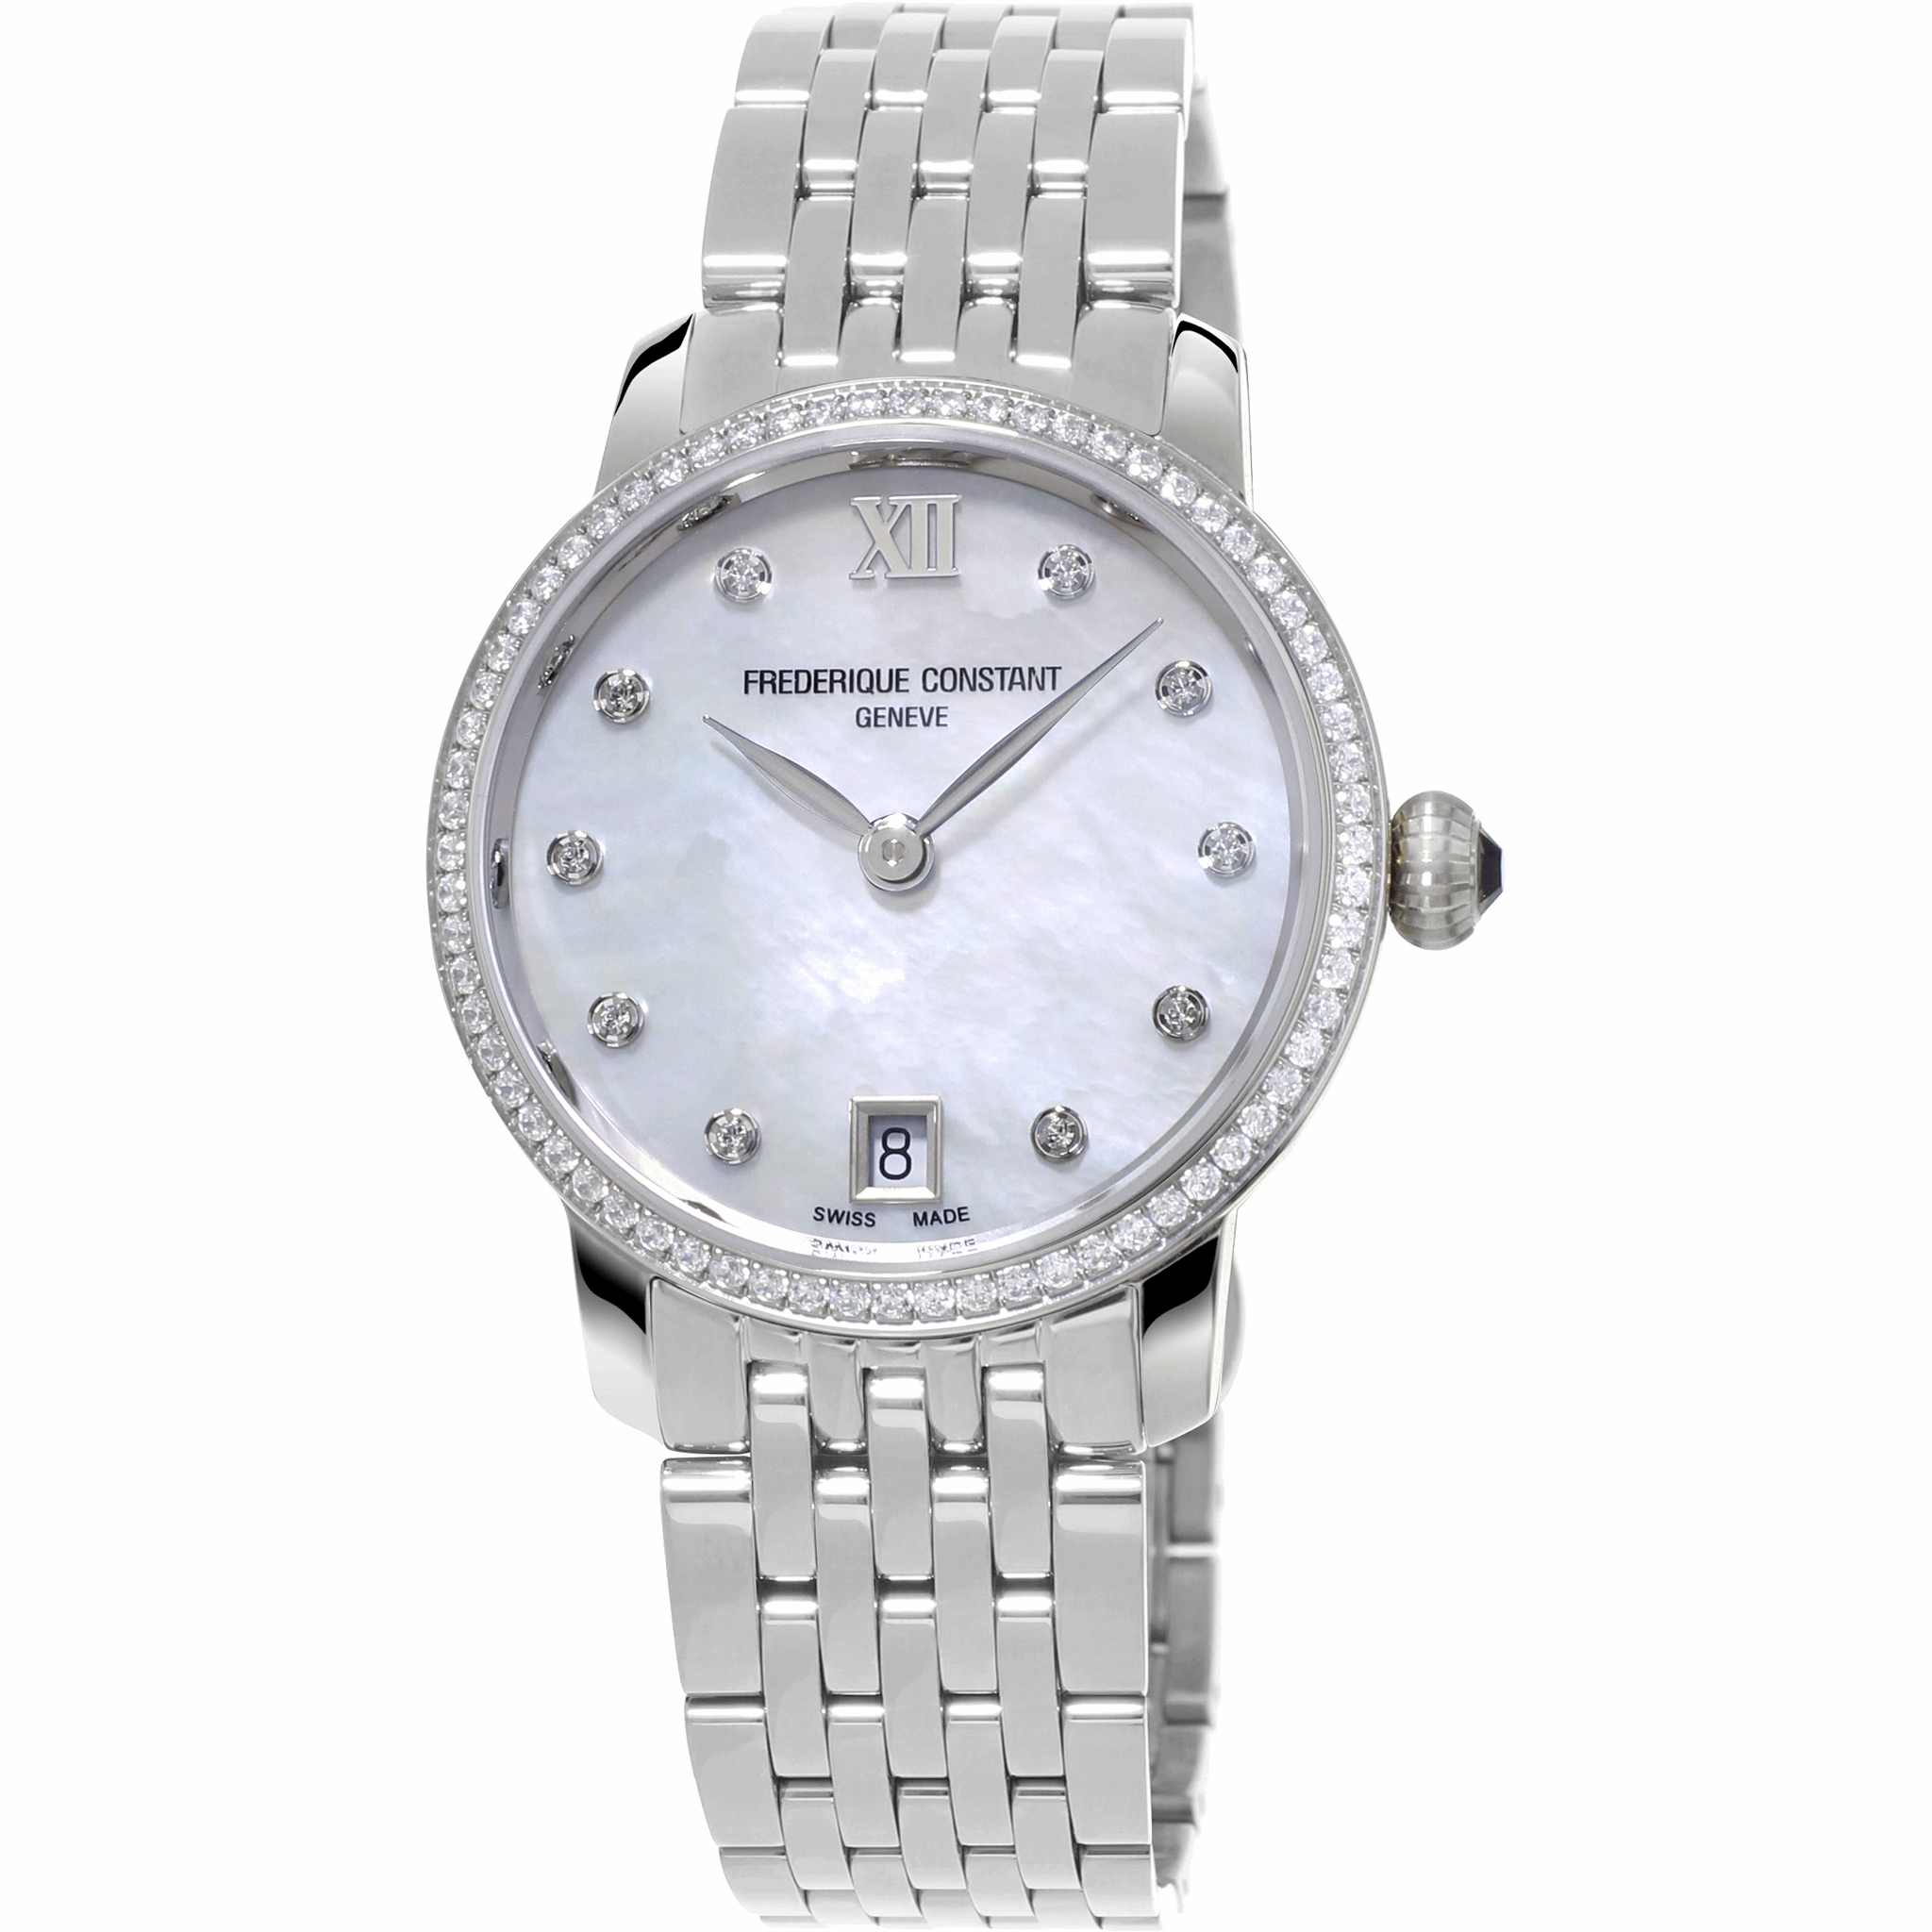 30mm Slimline Ladies Quartz Watch with White Mother of Pearl and Diamonds